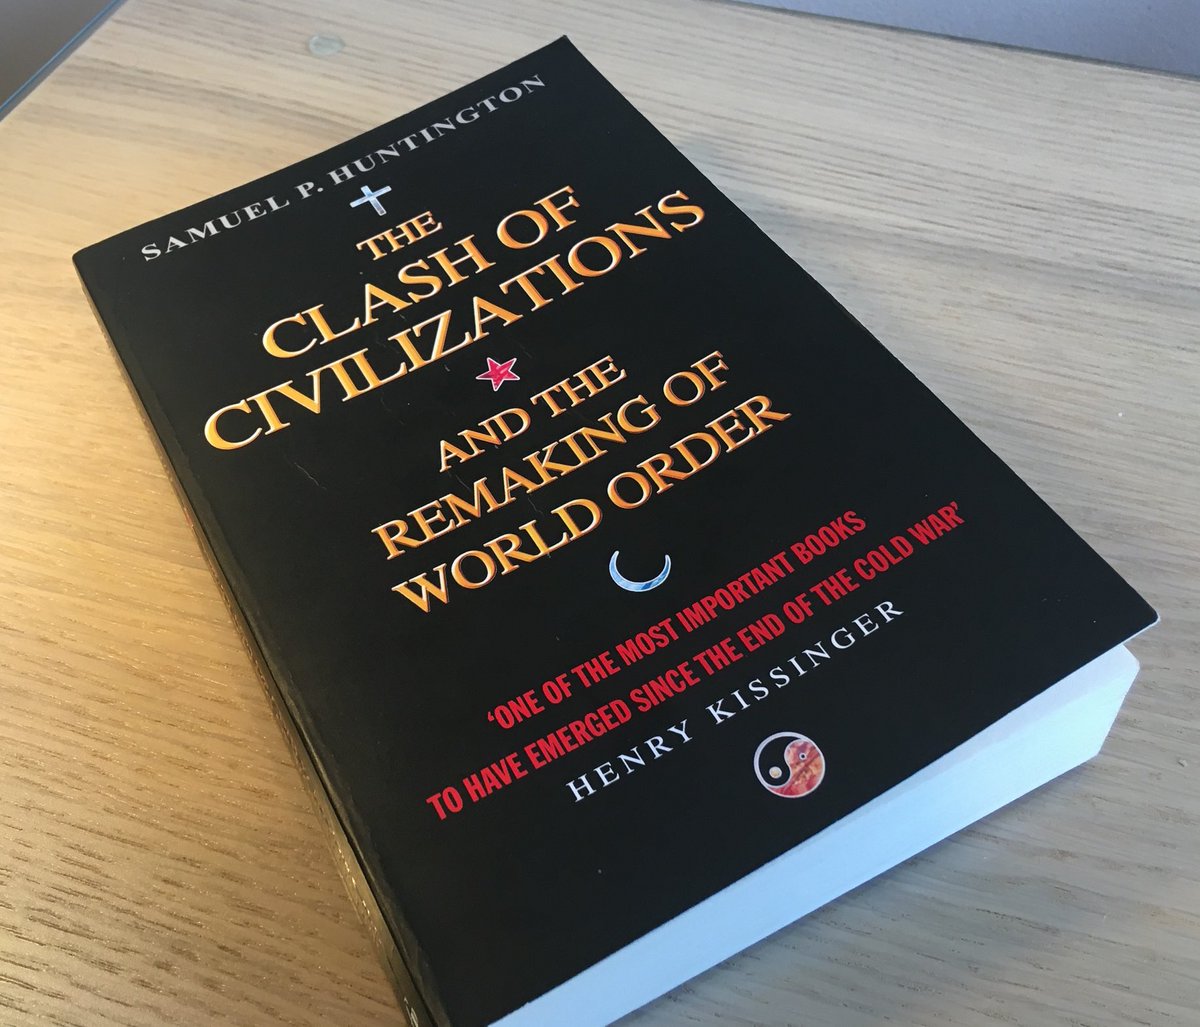 “Multiculturalism is in its essence anti-European civilization. It is basically an anti-Western ideology.”

Samuel P. Huntington, The Clash of Civilizations and the Remaking of World Order